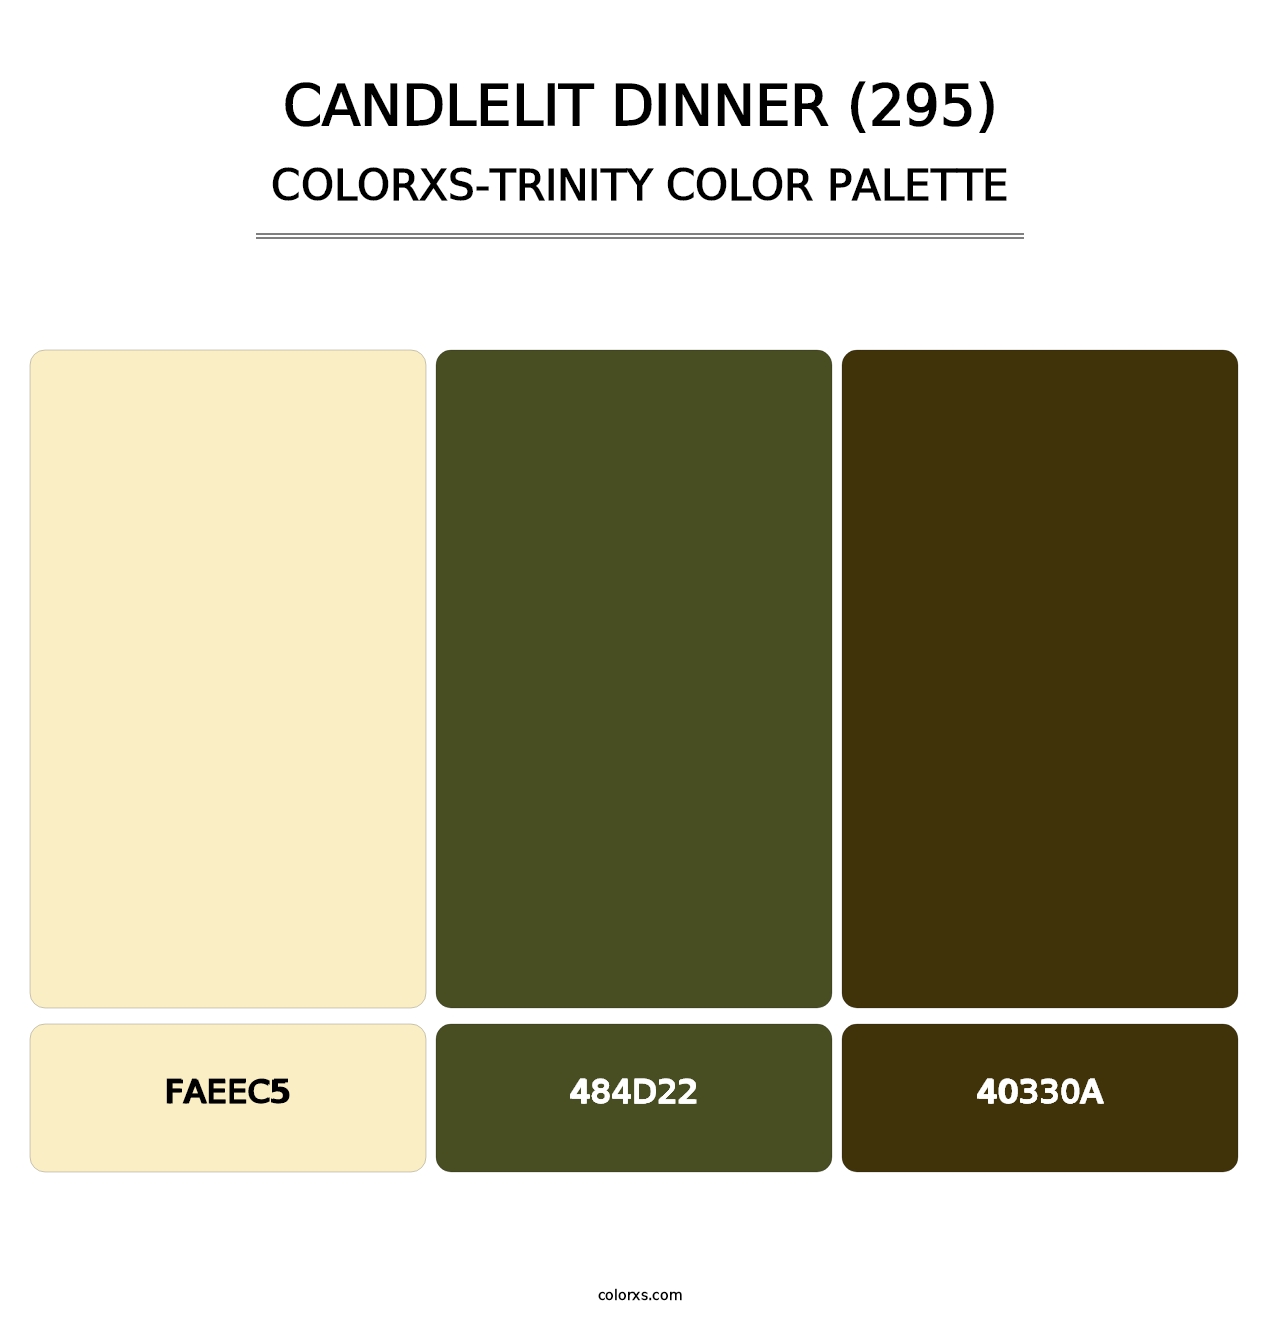 Candlelit Dinner (295) - Colorxs Trinity Palette